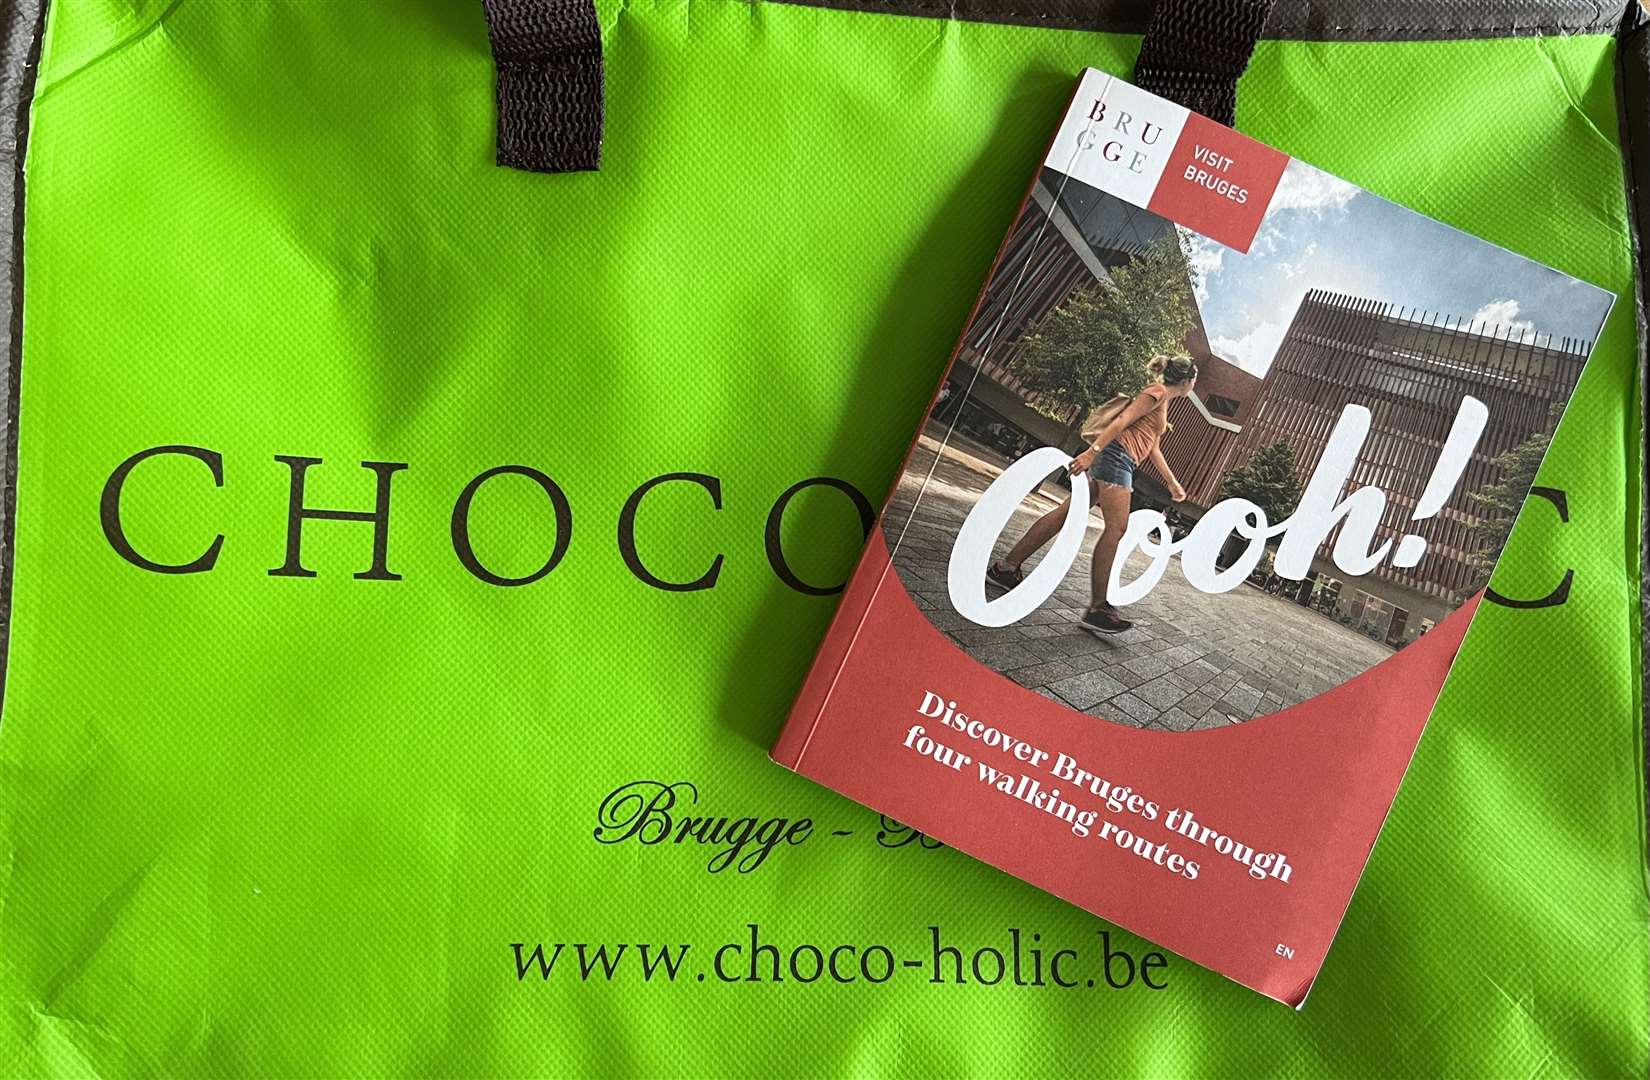 A cool bag for stopping your chocolate from melting and the Ooh! Walking guide